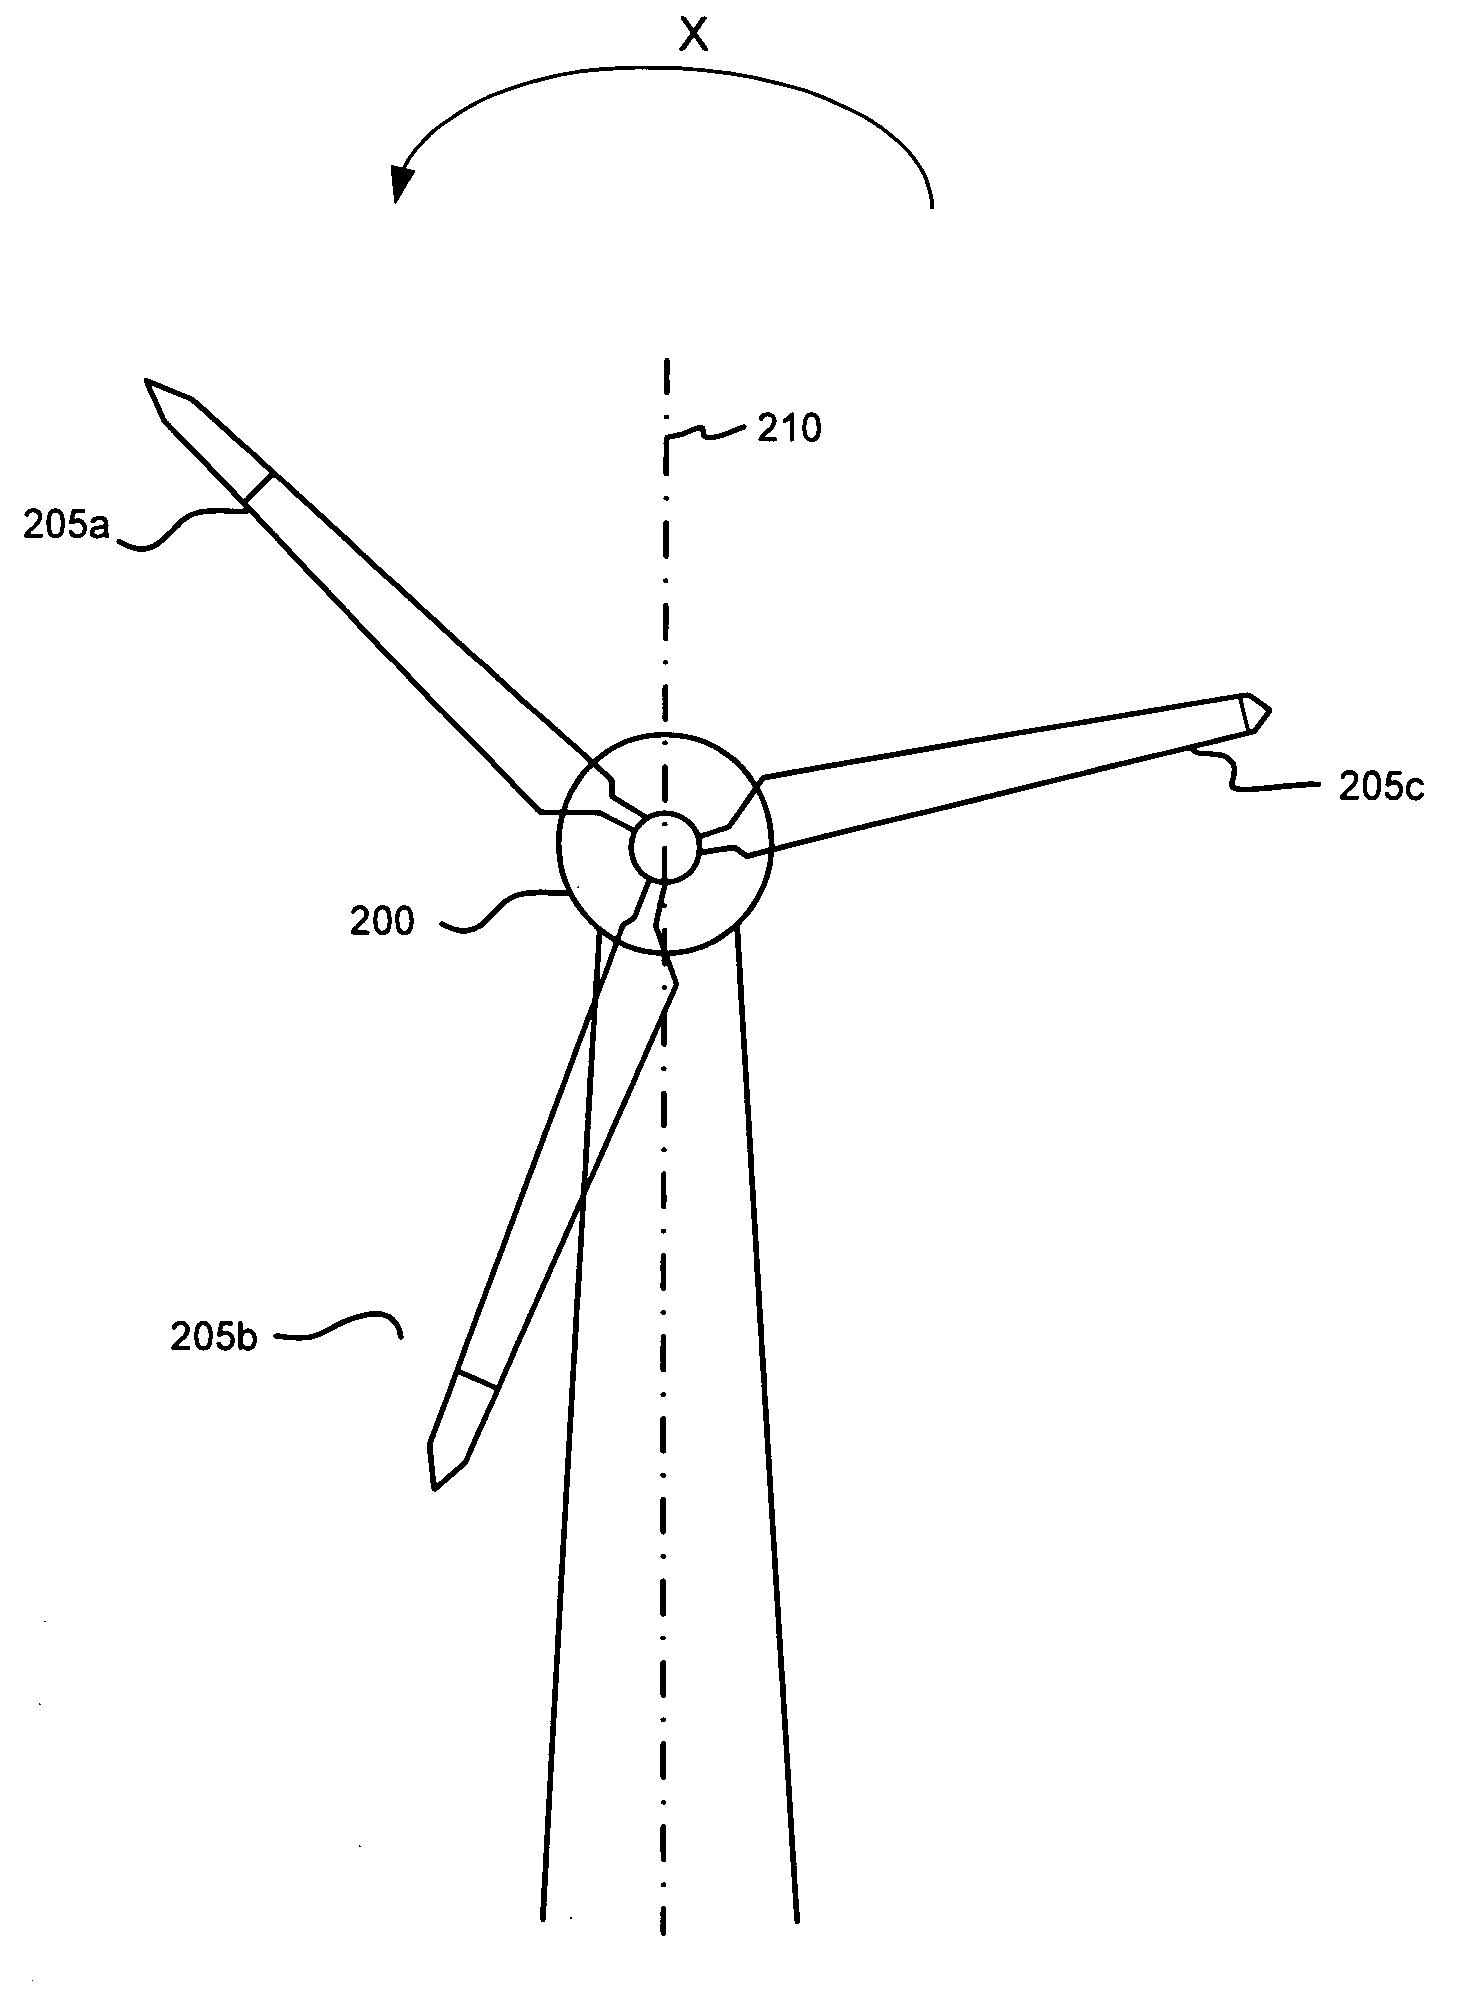 Control modes for extendable rotor blades